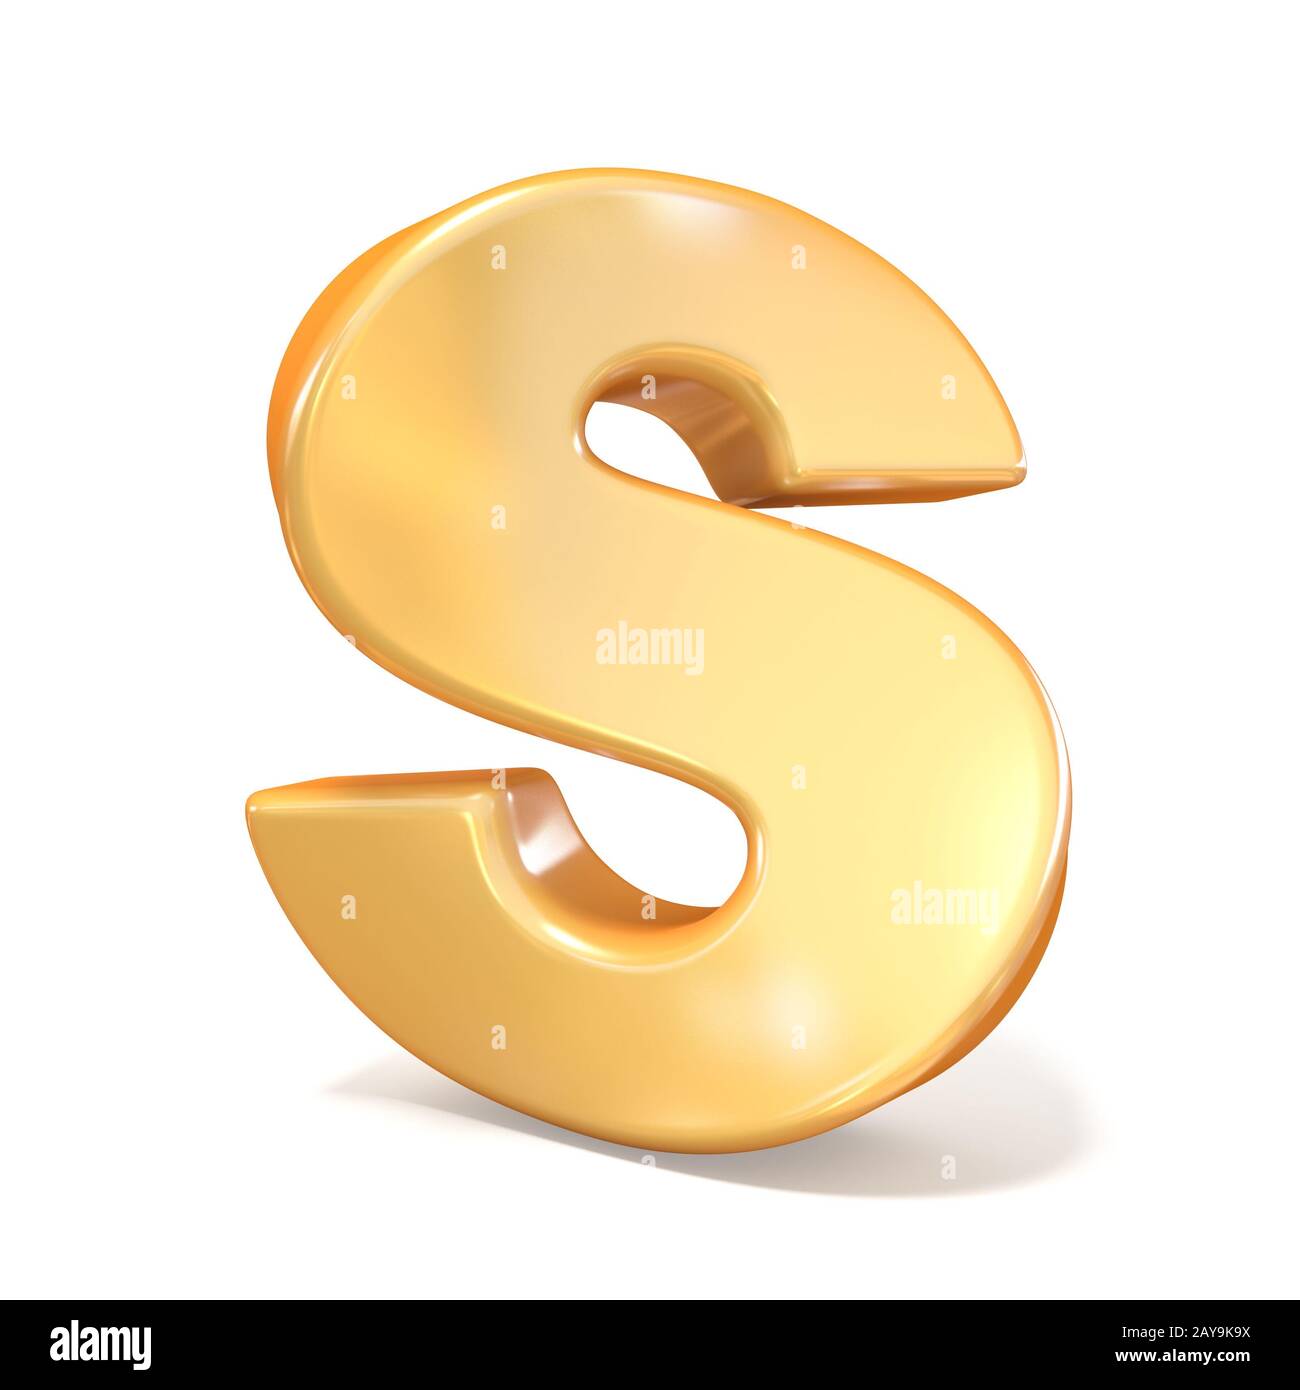 Orange twisted font uppercase letter S 3D Stock Photo